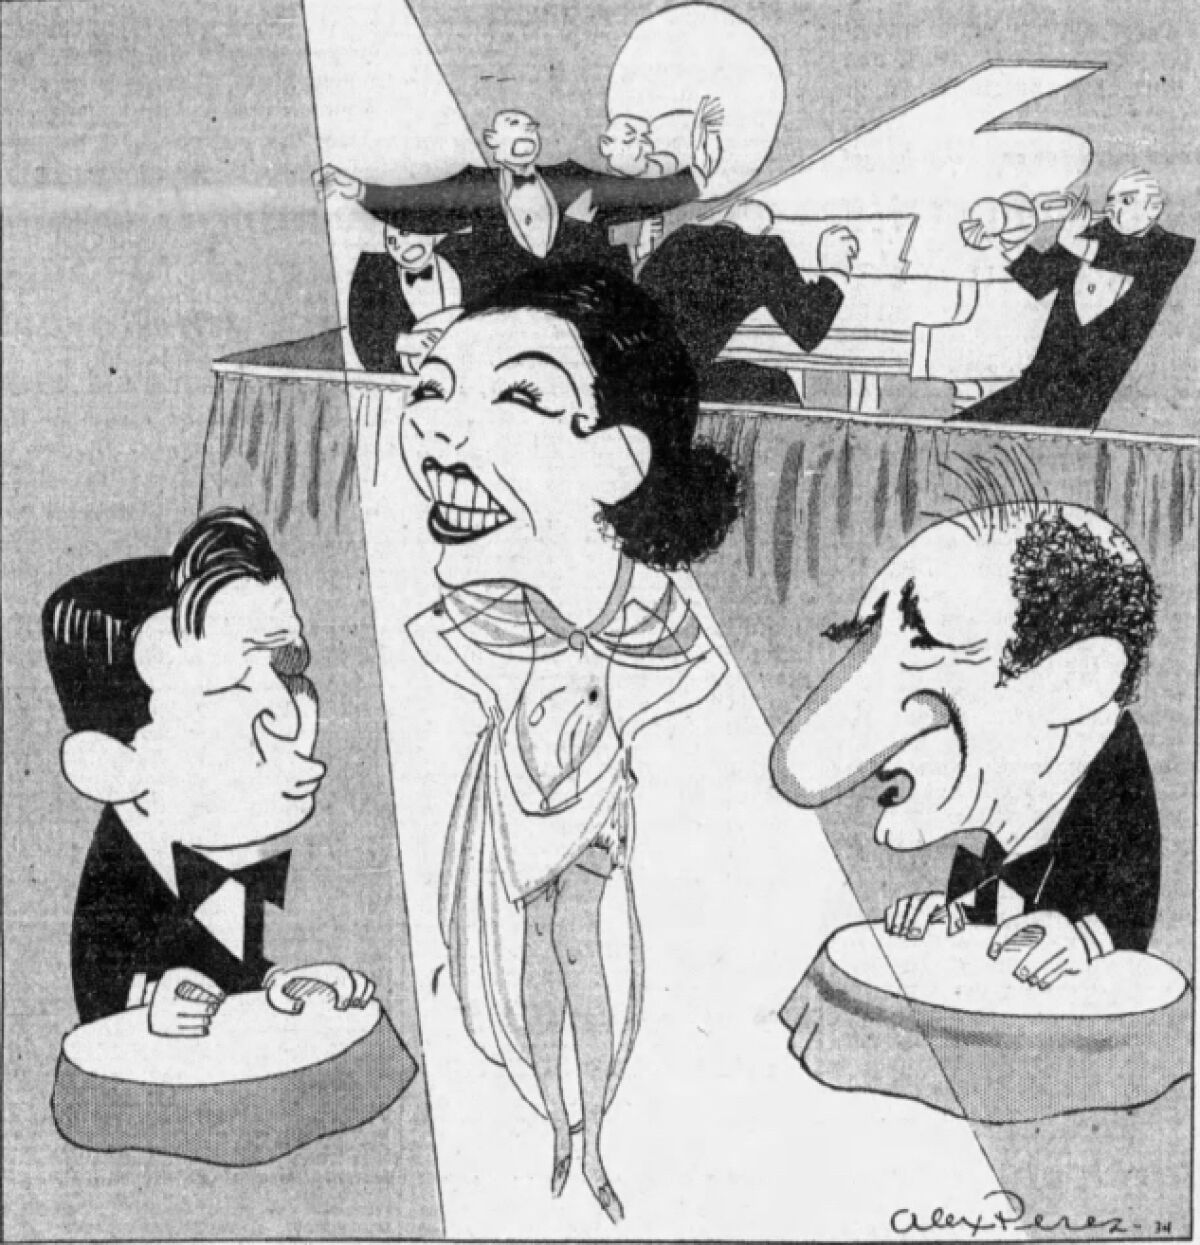 A caricature of two men and a woman in front of a band